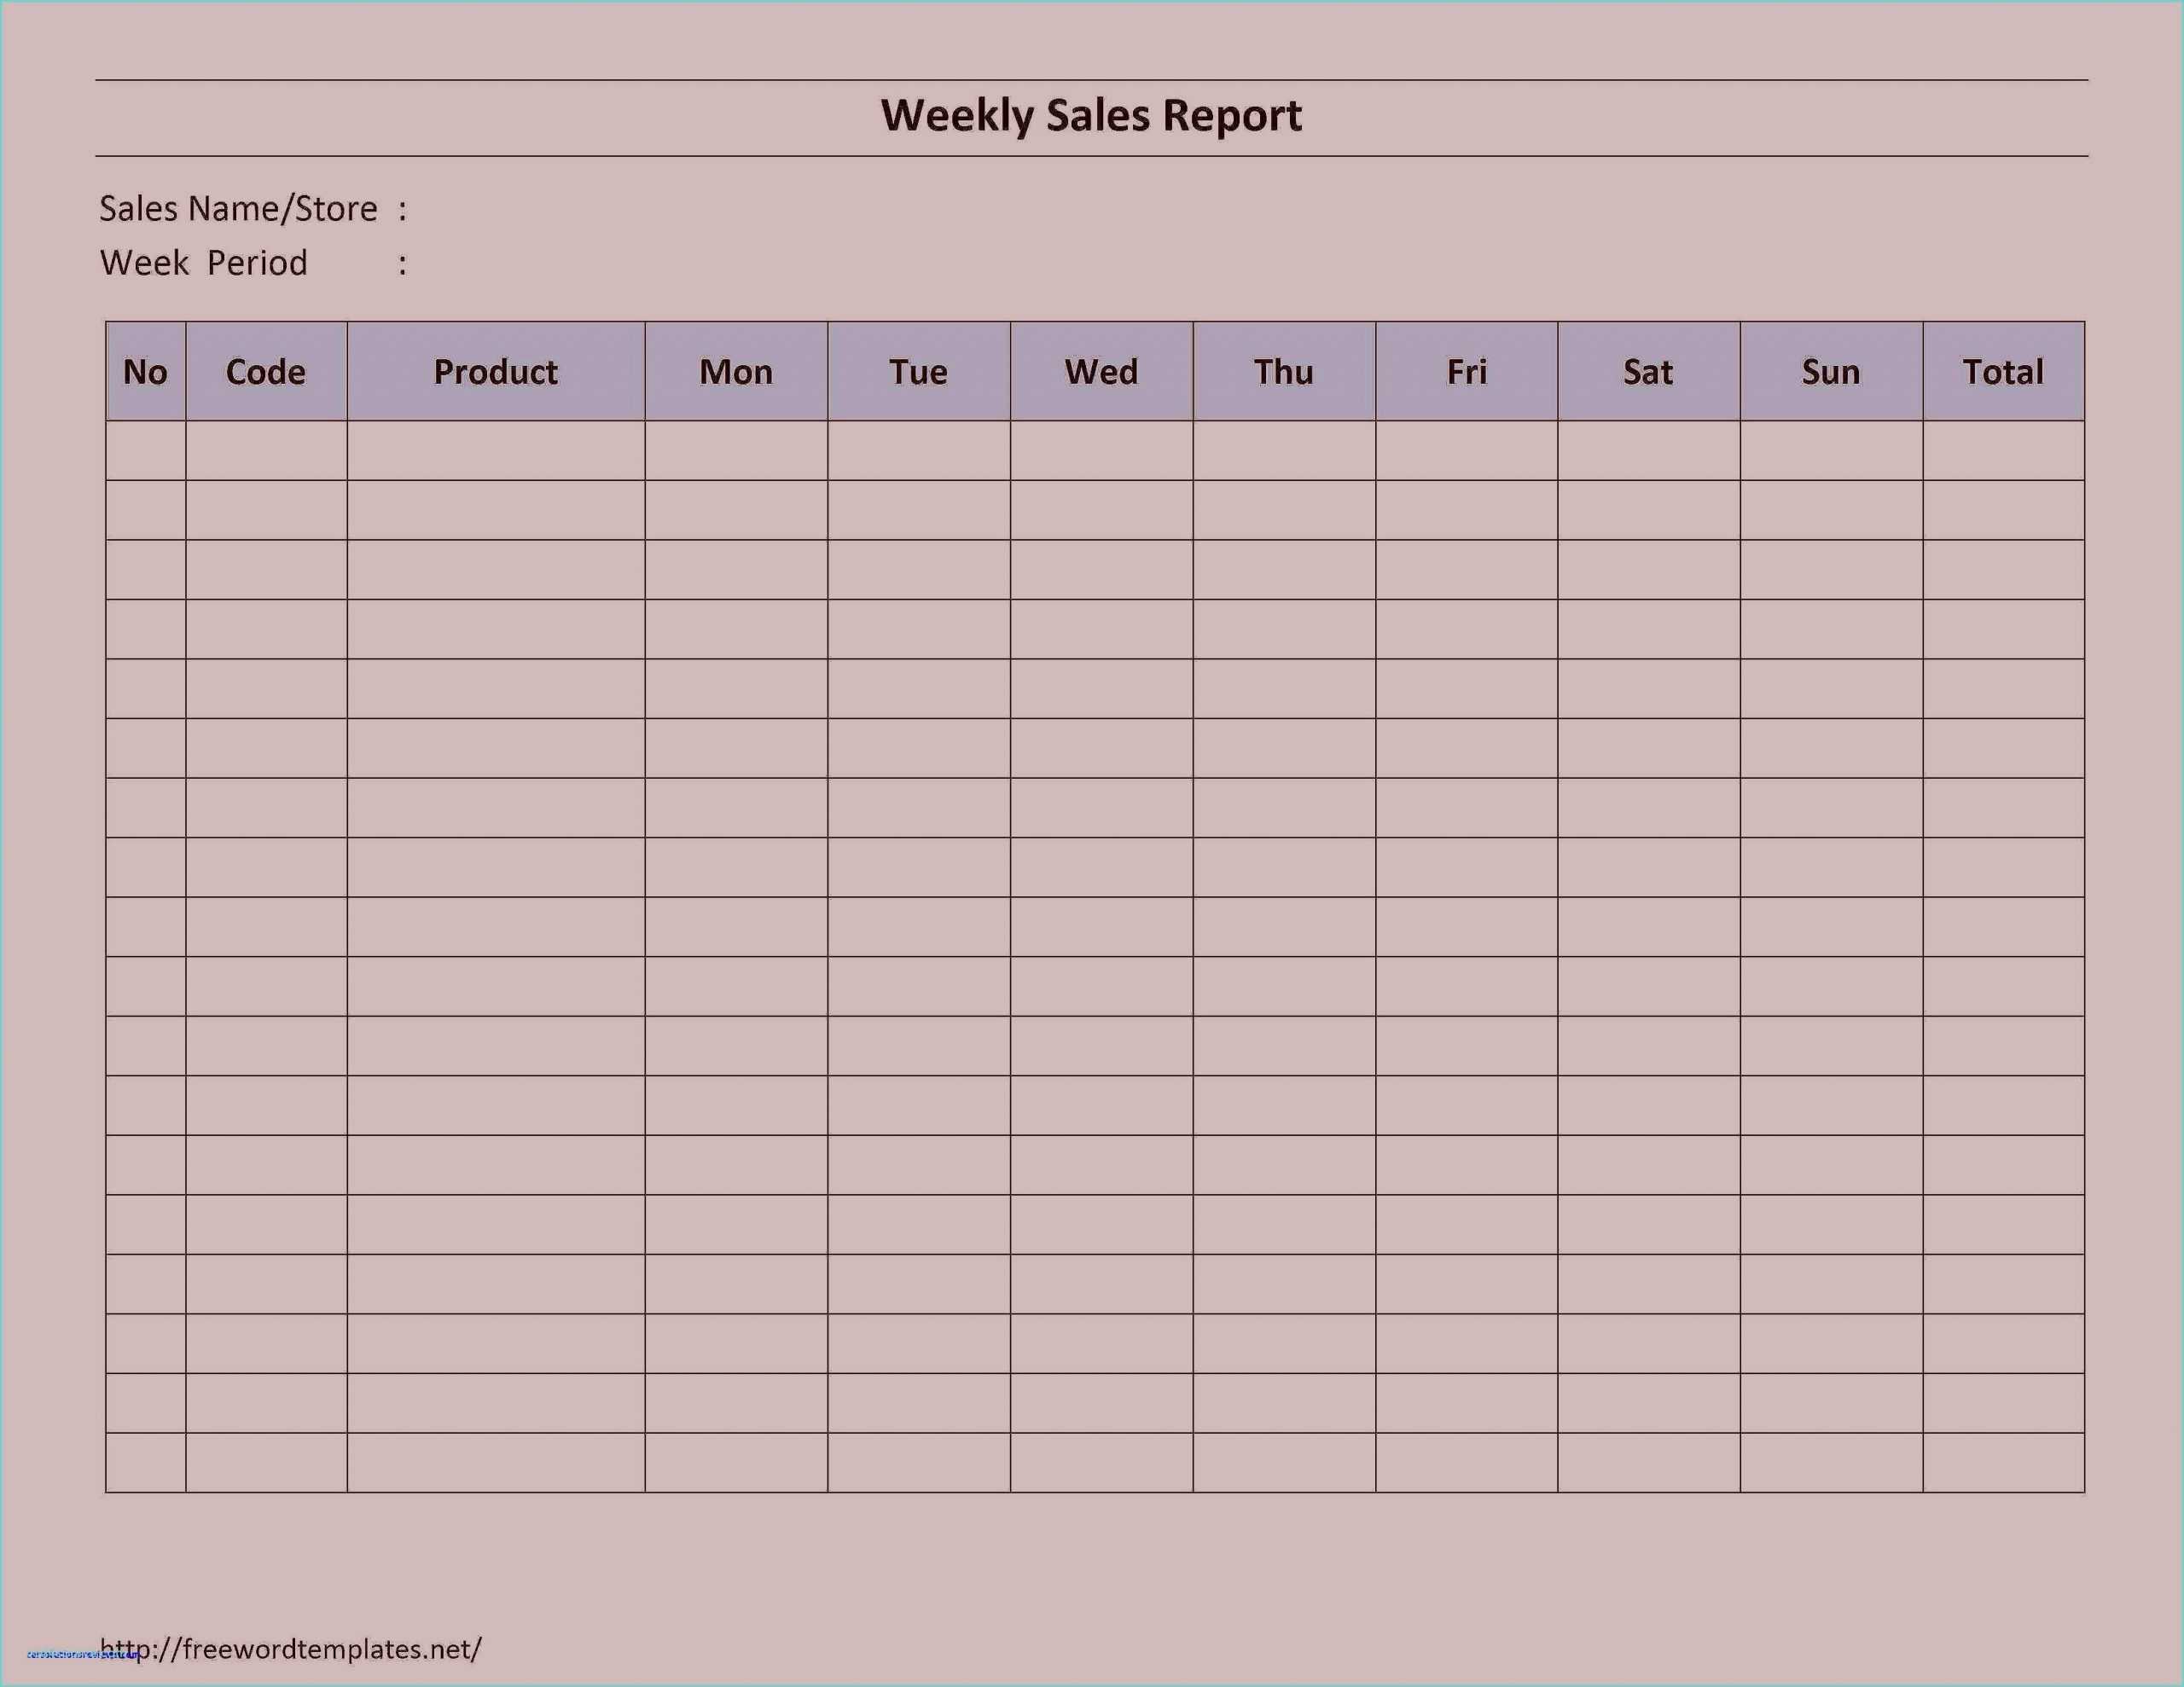 Spreadsheet Report And Weekly Sales Template Activity Pertaining To Sales Activity Report Template Excel